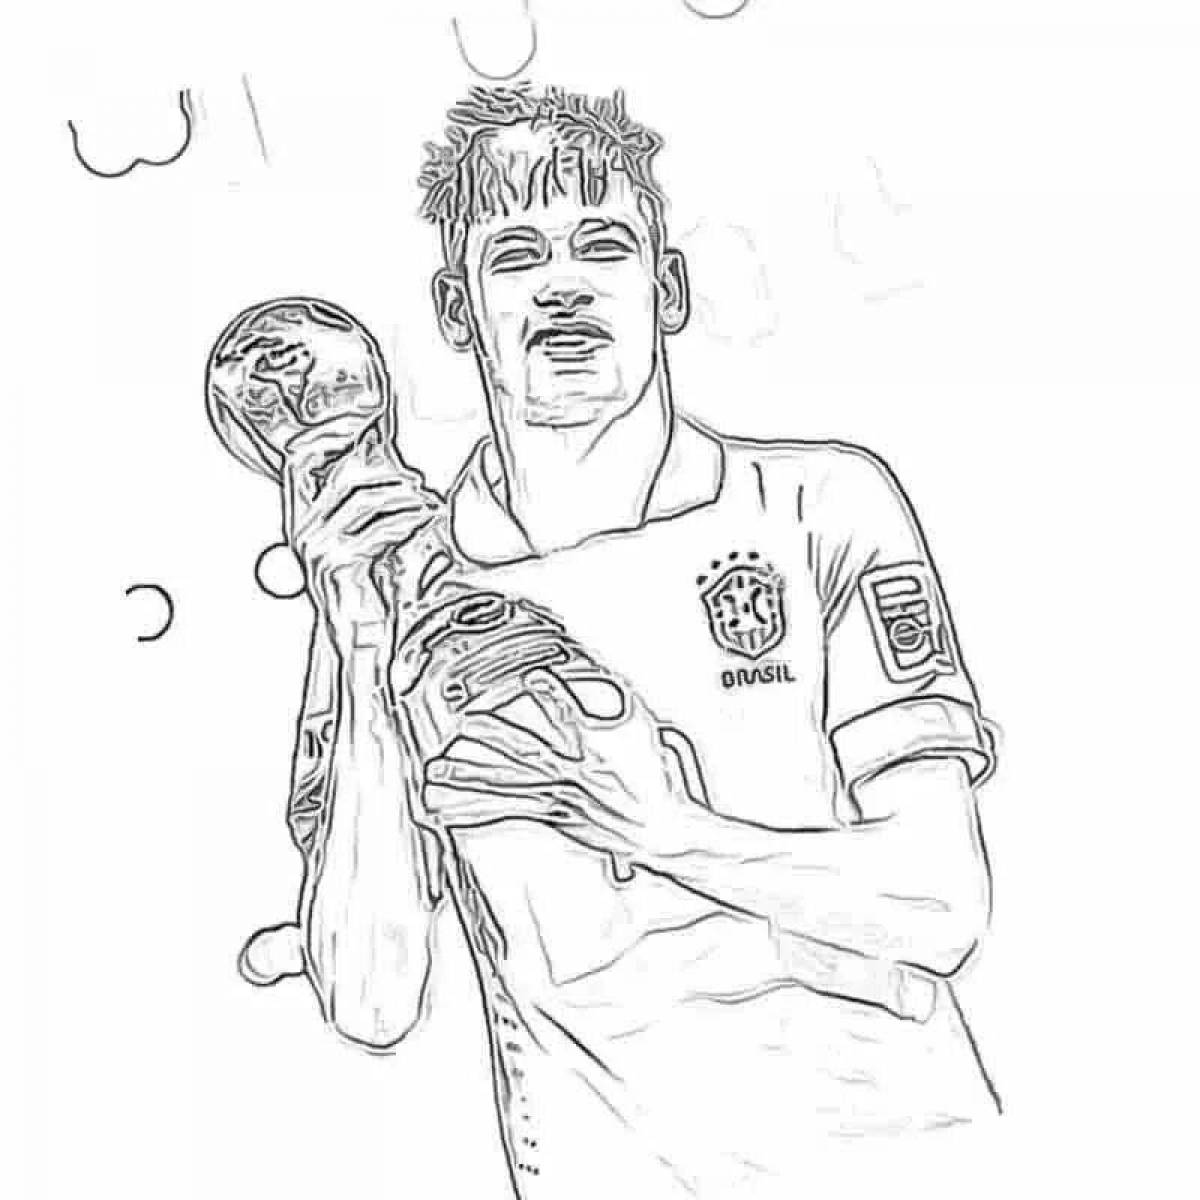 Coloring page of a shiny football player